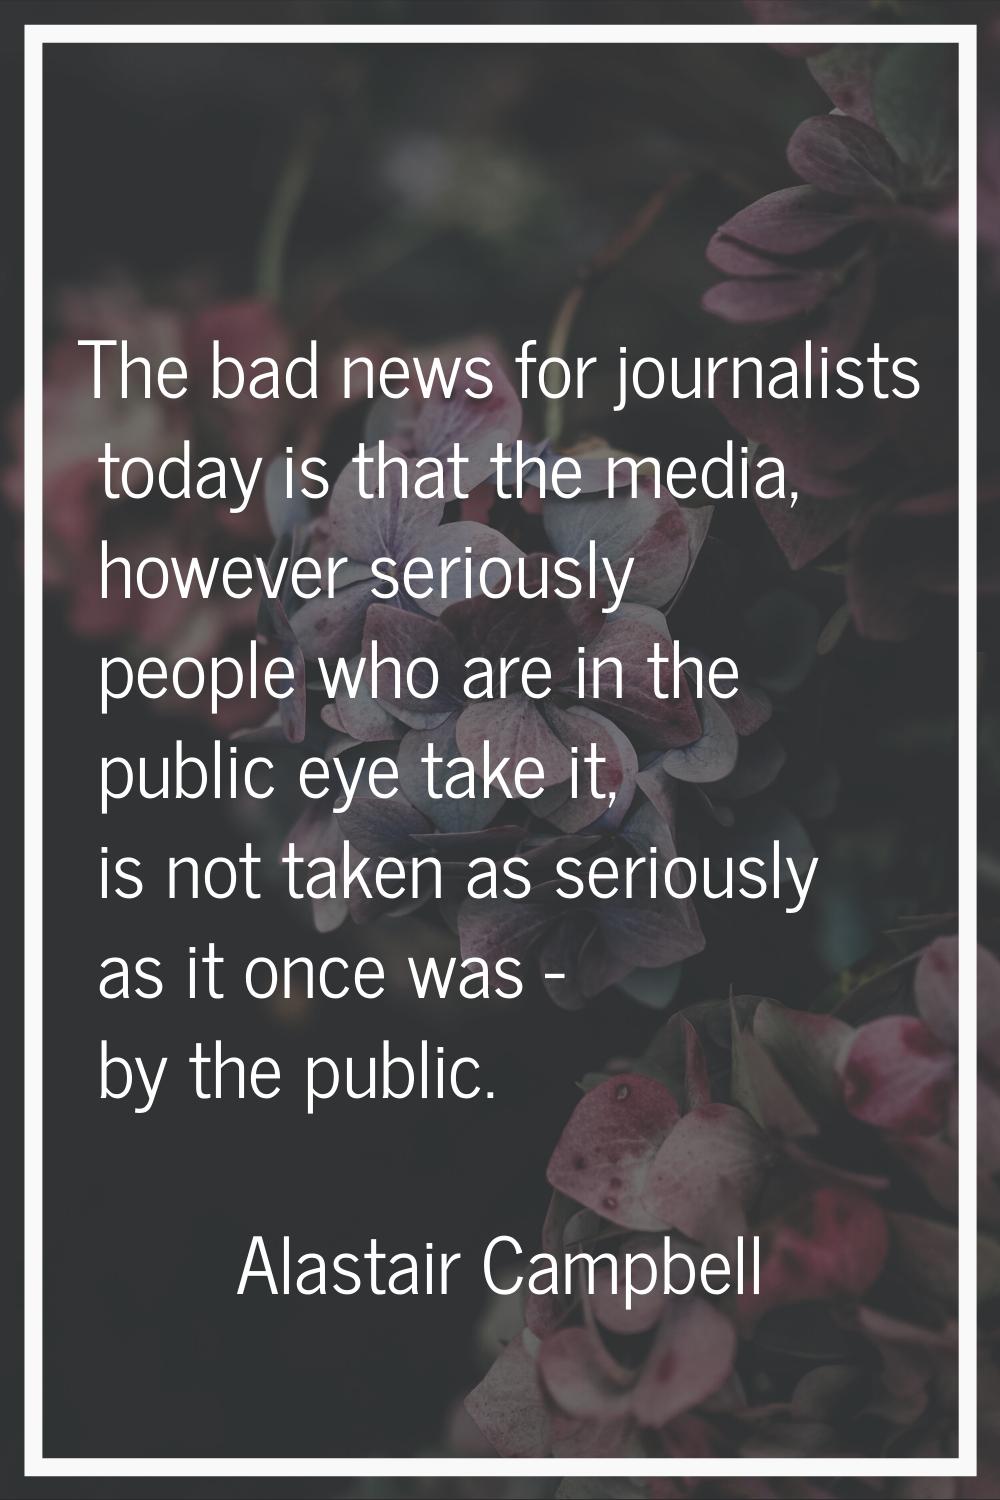 The bad news for journalists today is that the media, however seriously people who are in the publi